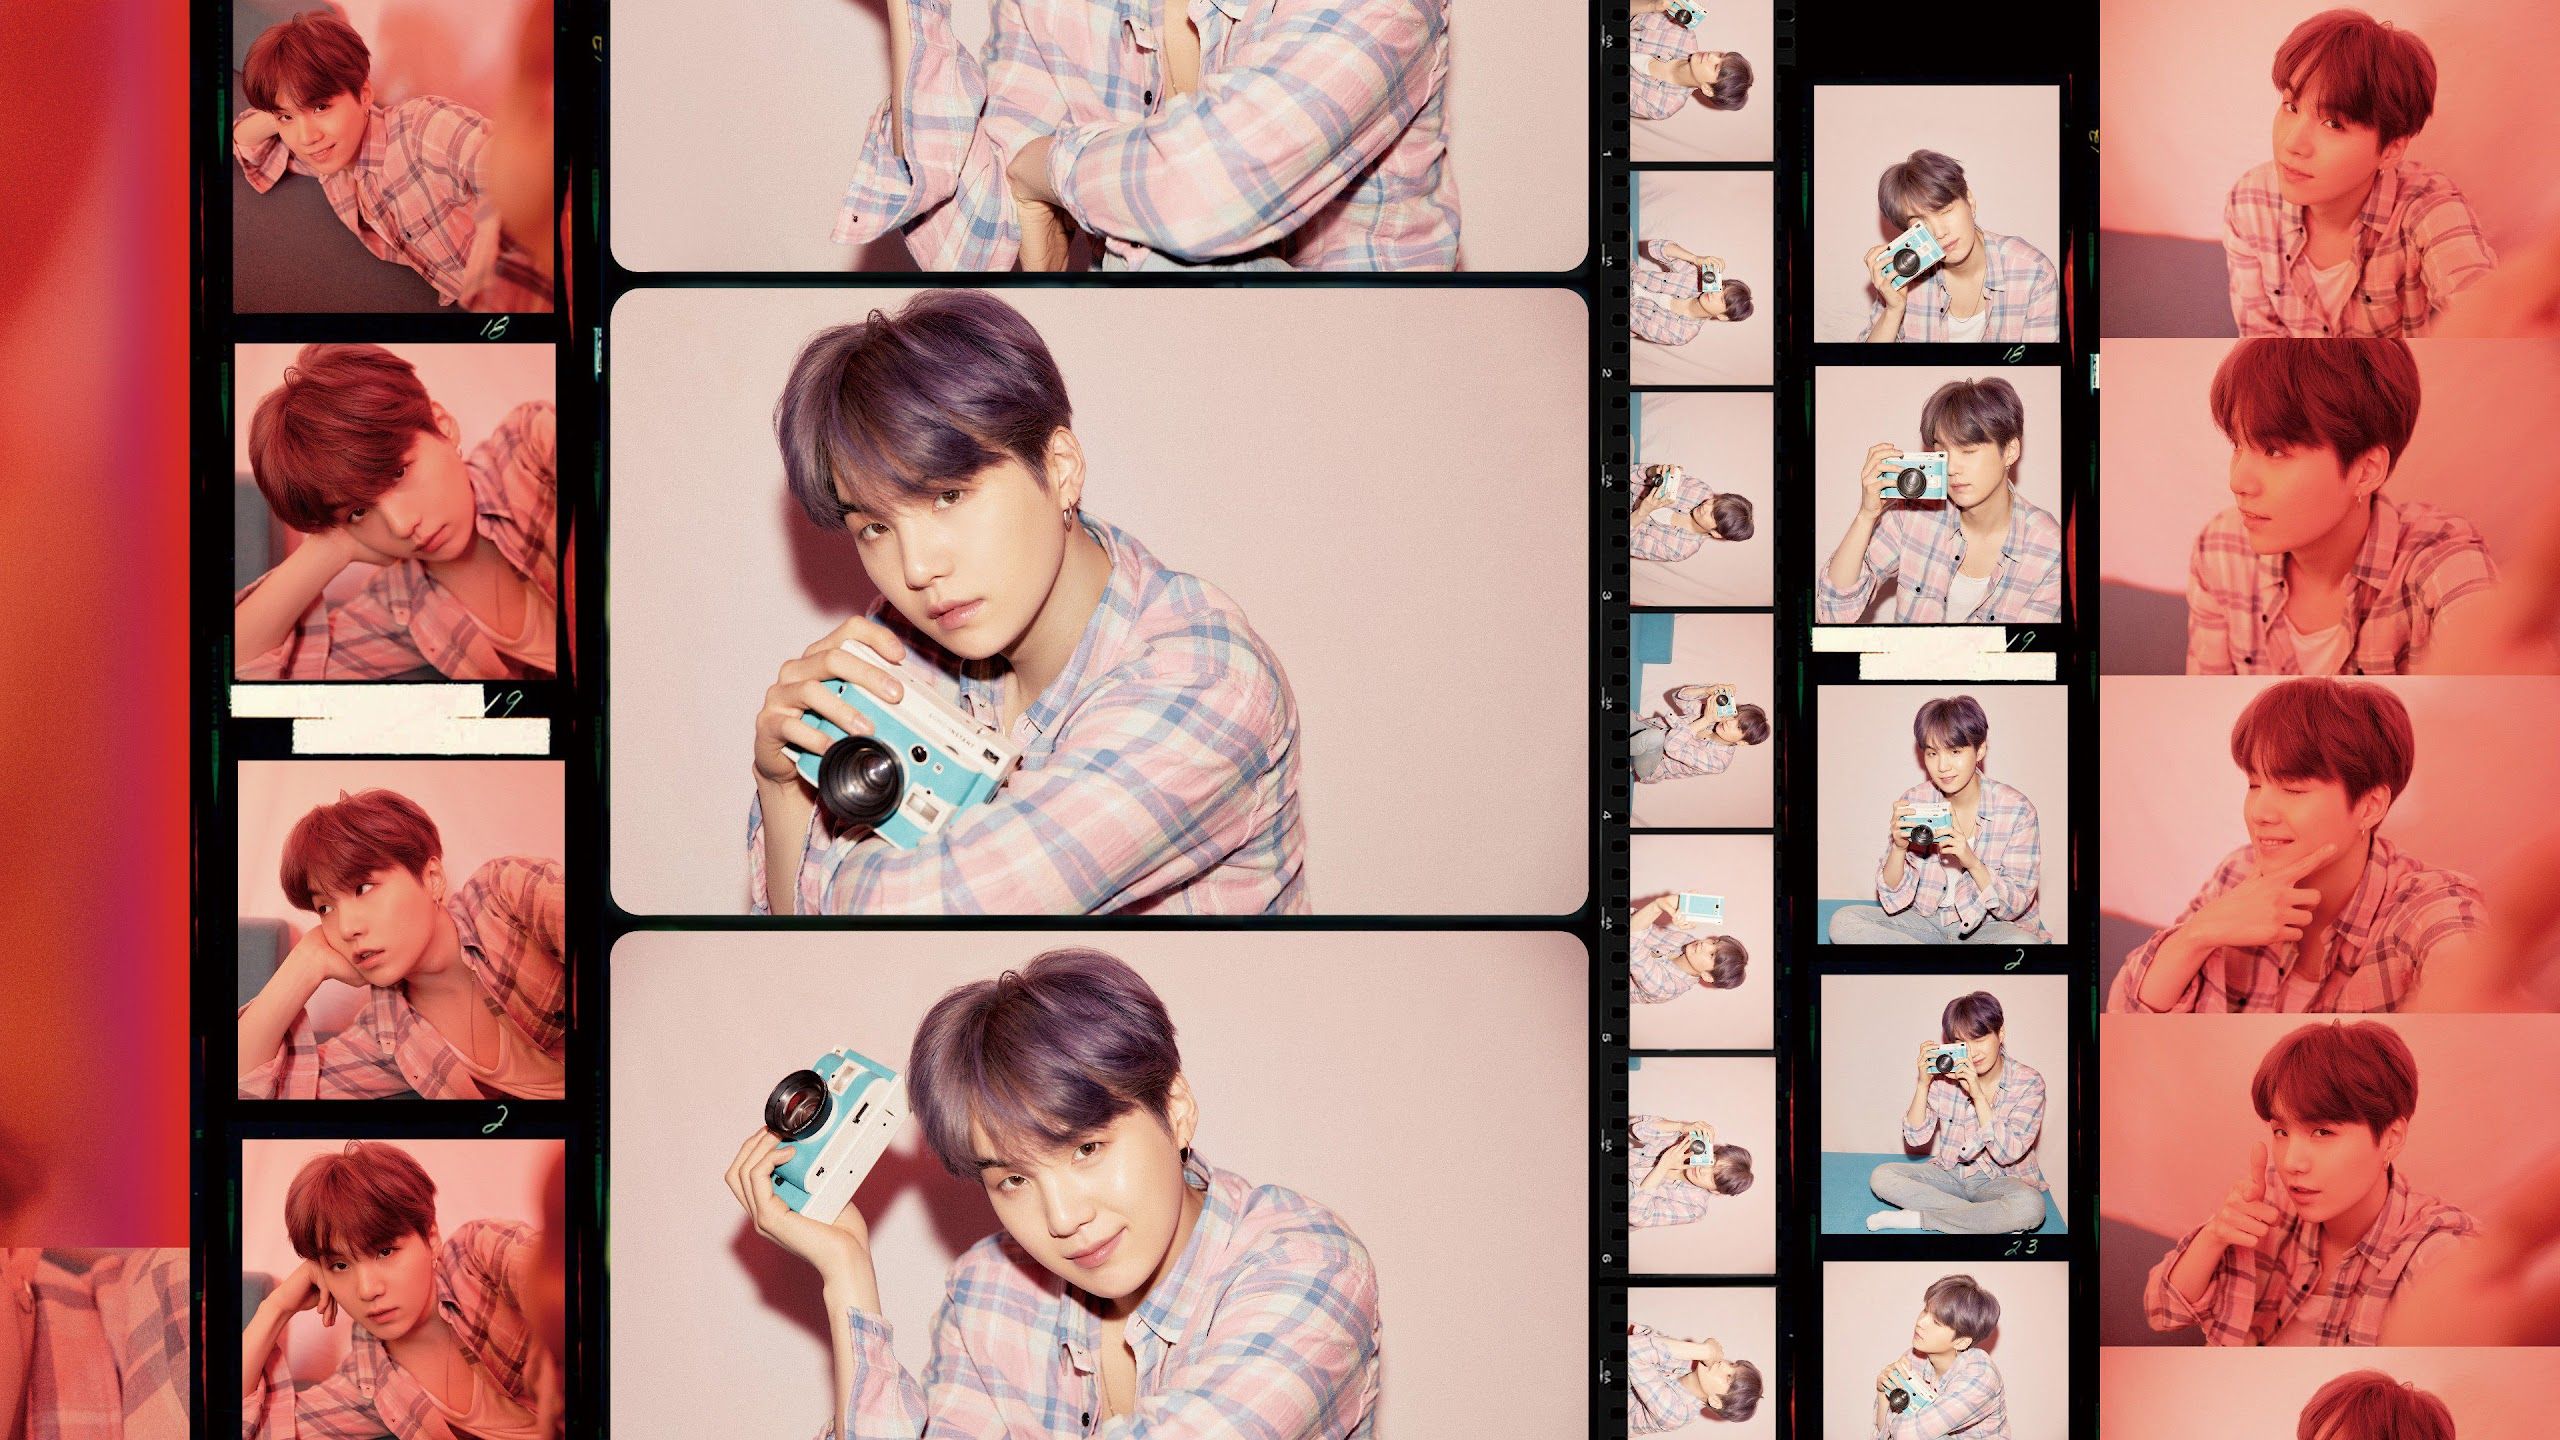 A collage of images of Jungkook from BTS holding a camera - Suga